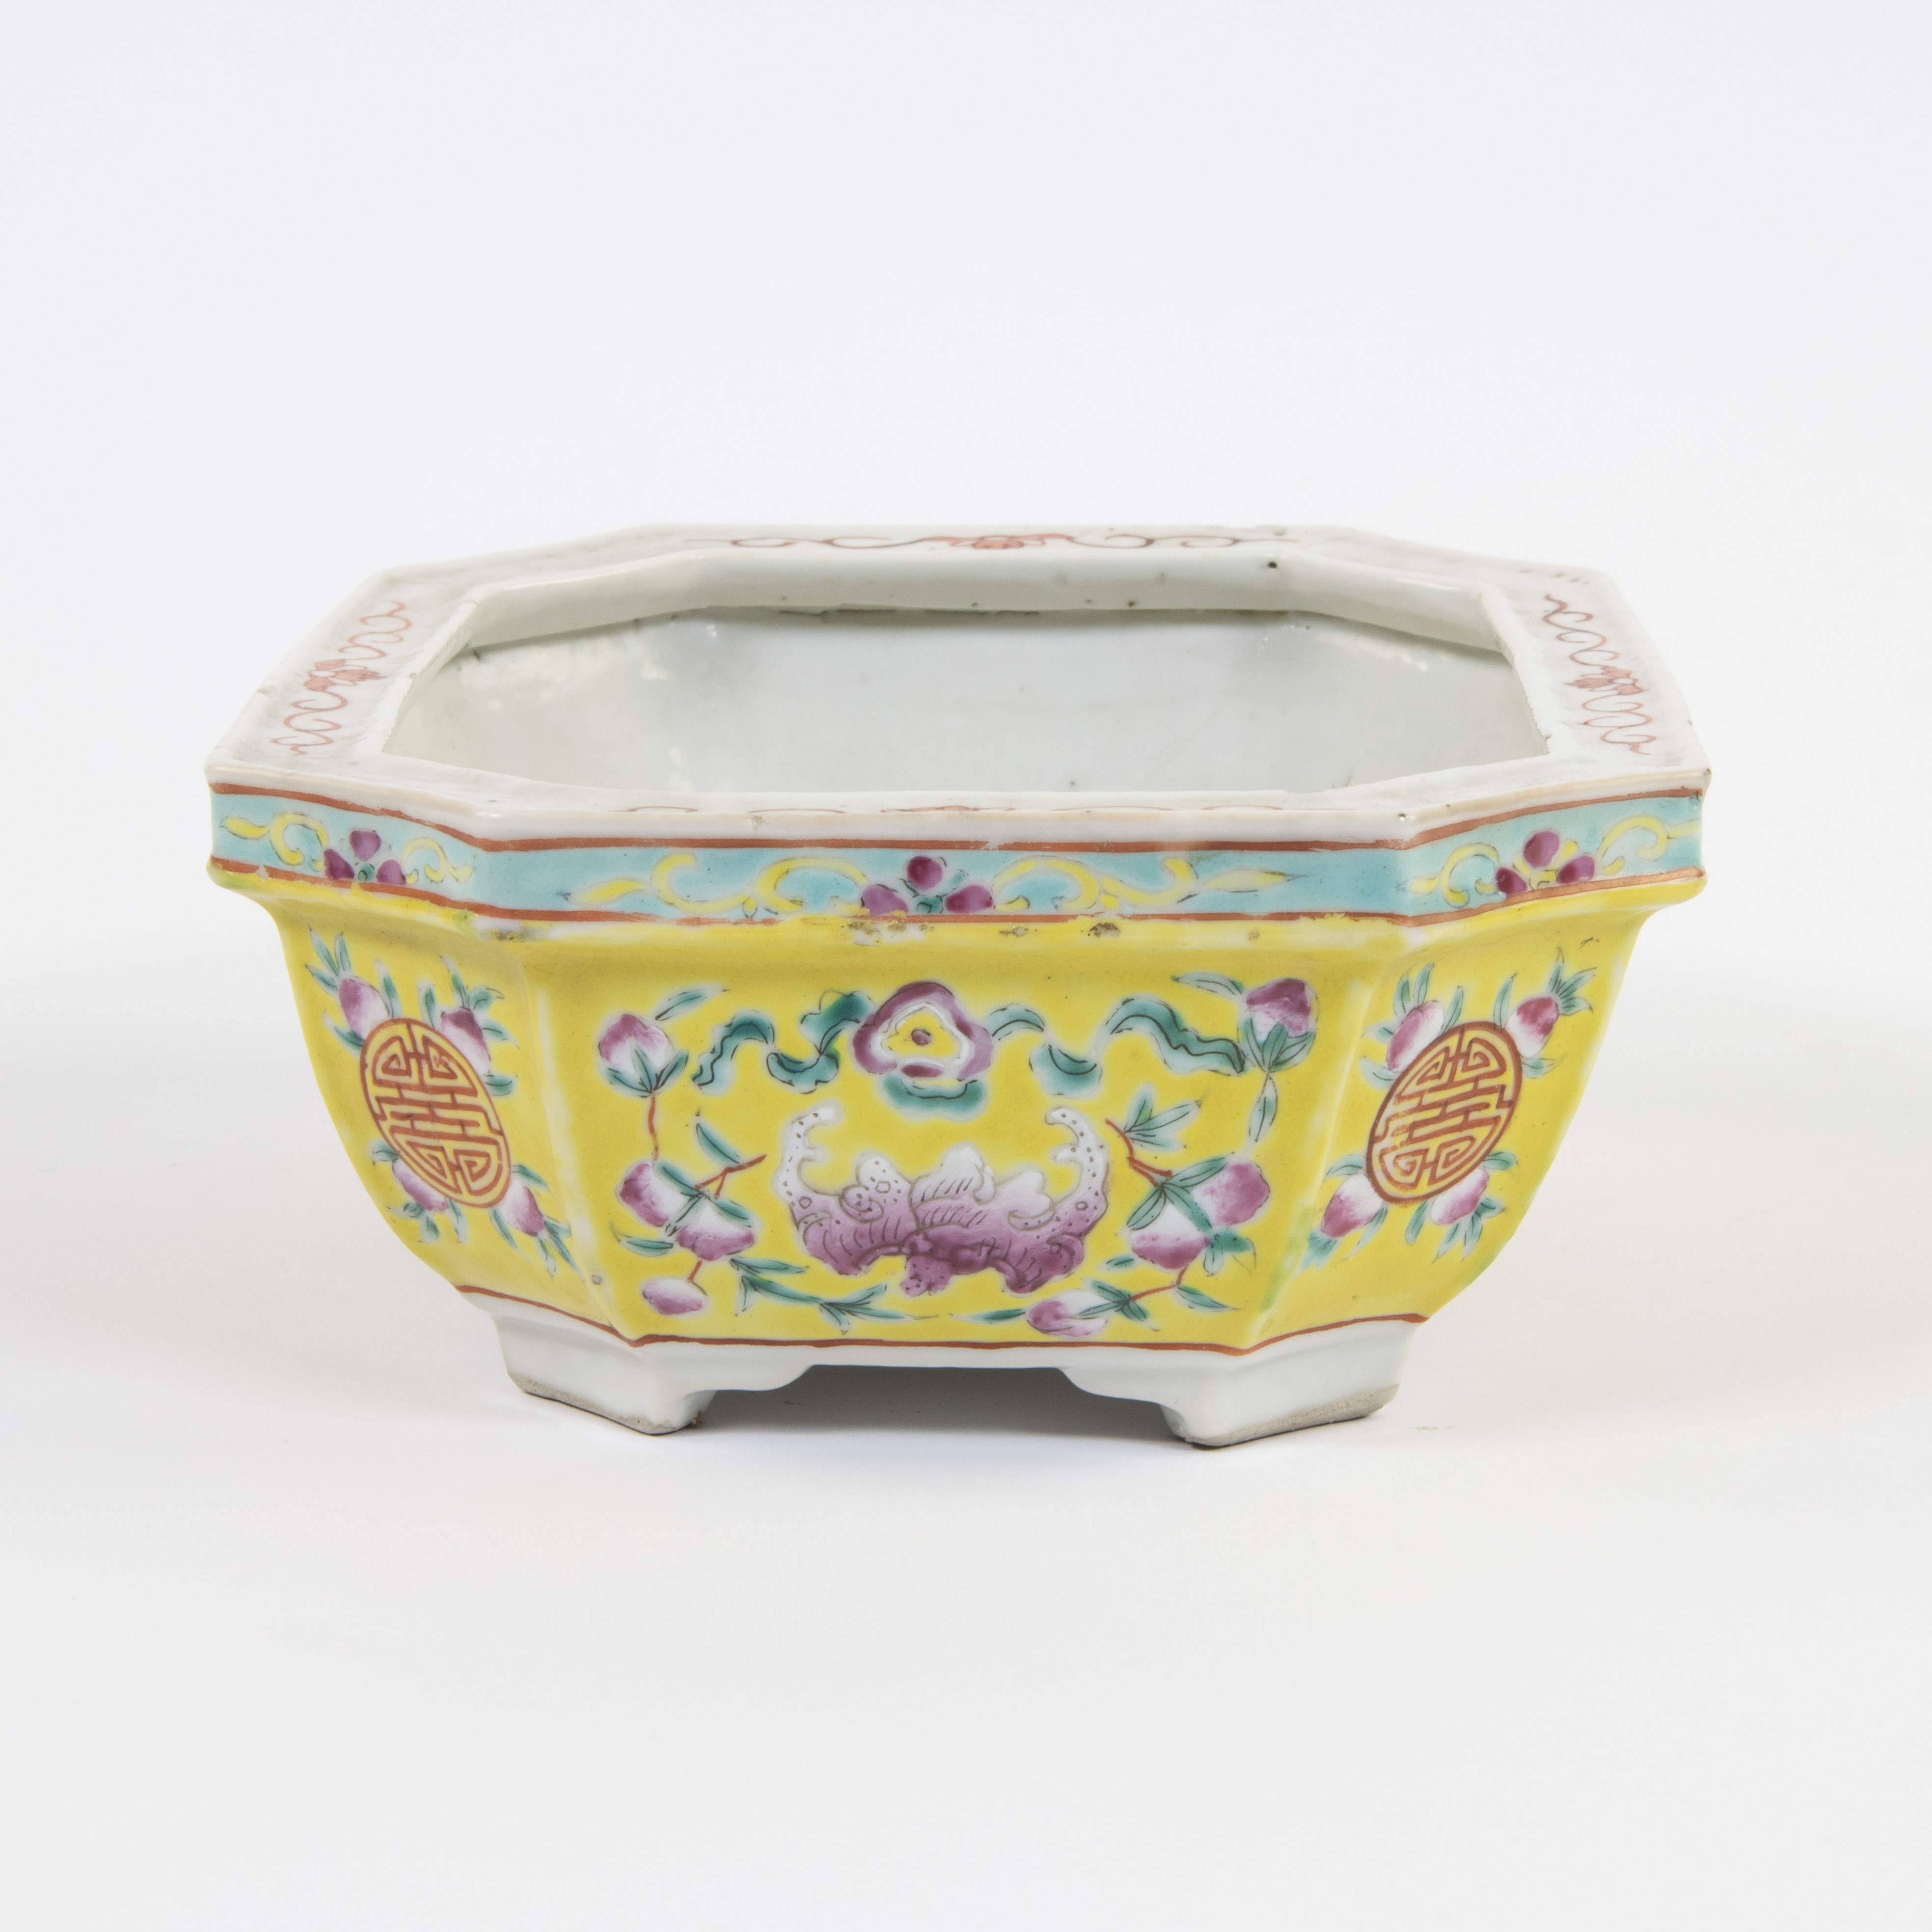 Collection of Chinese porcelain 19th century - Image 11 of 13